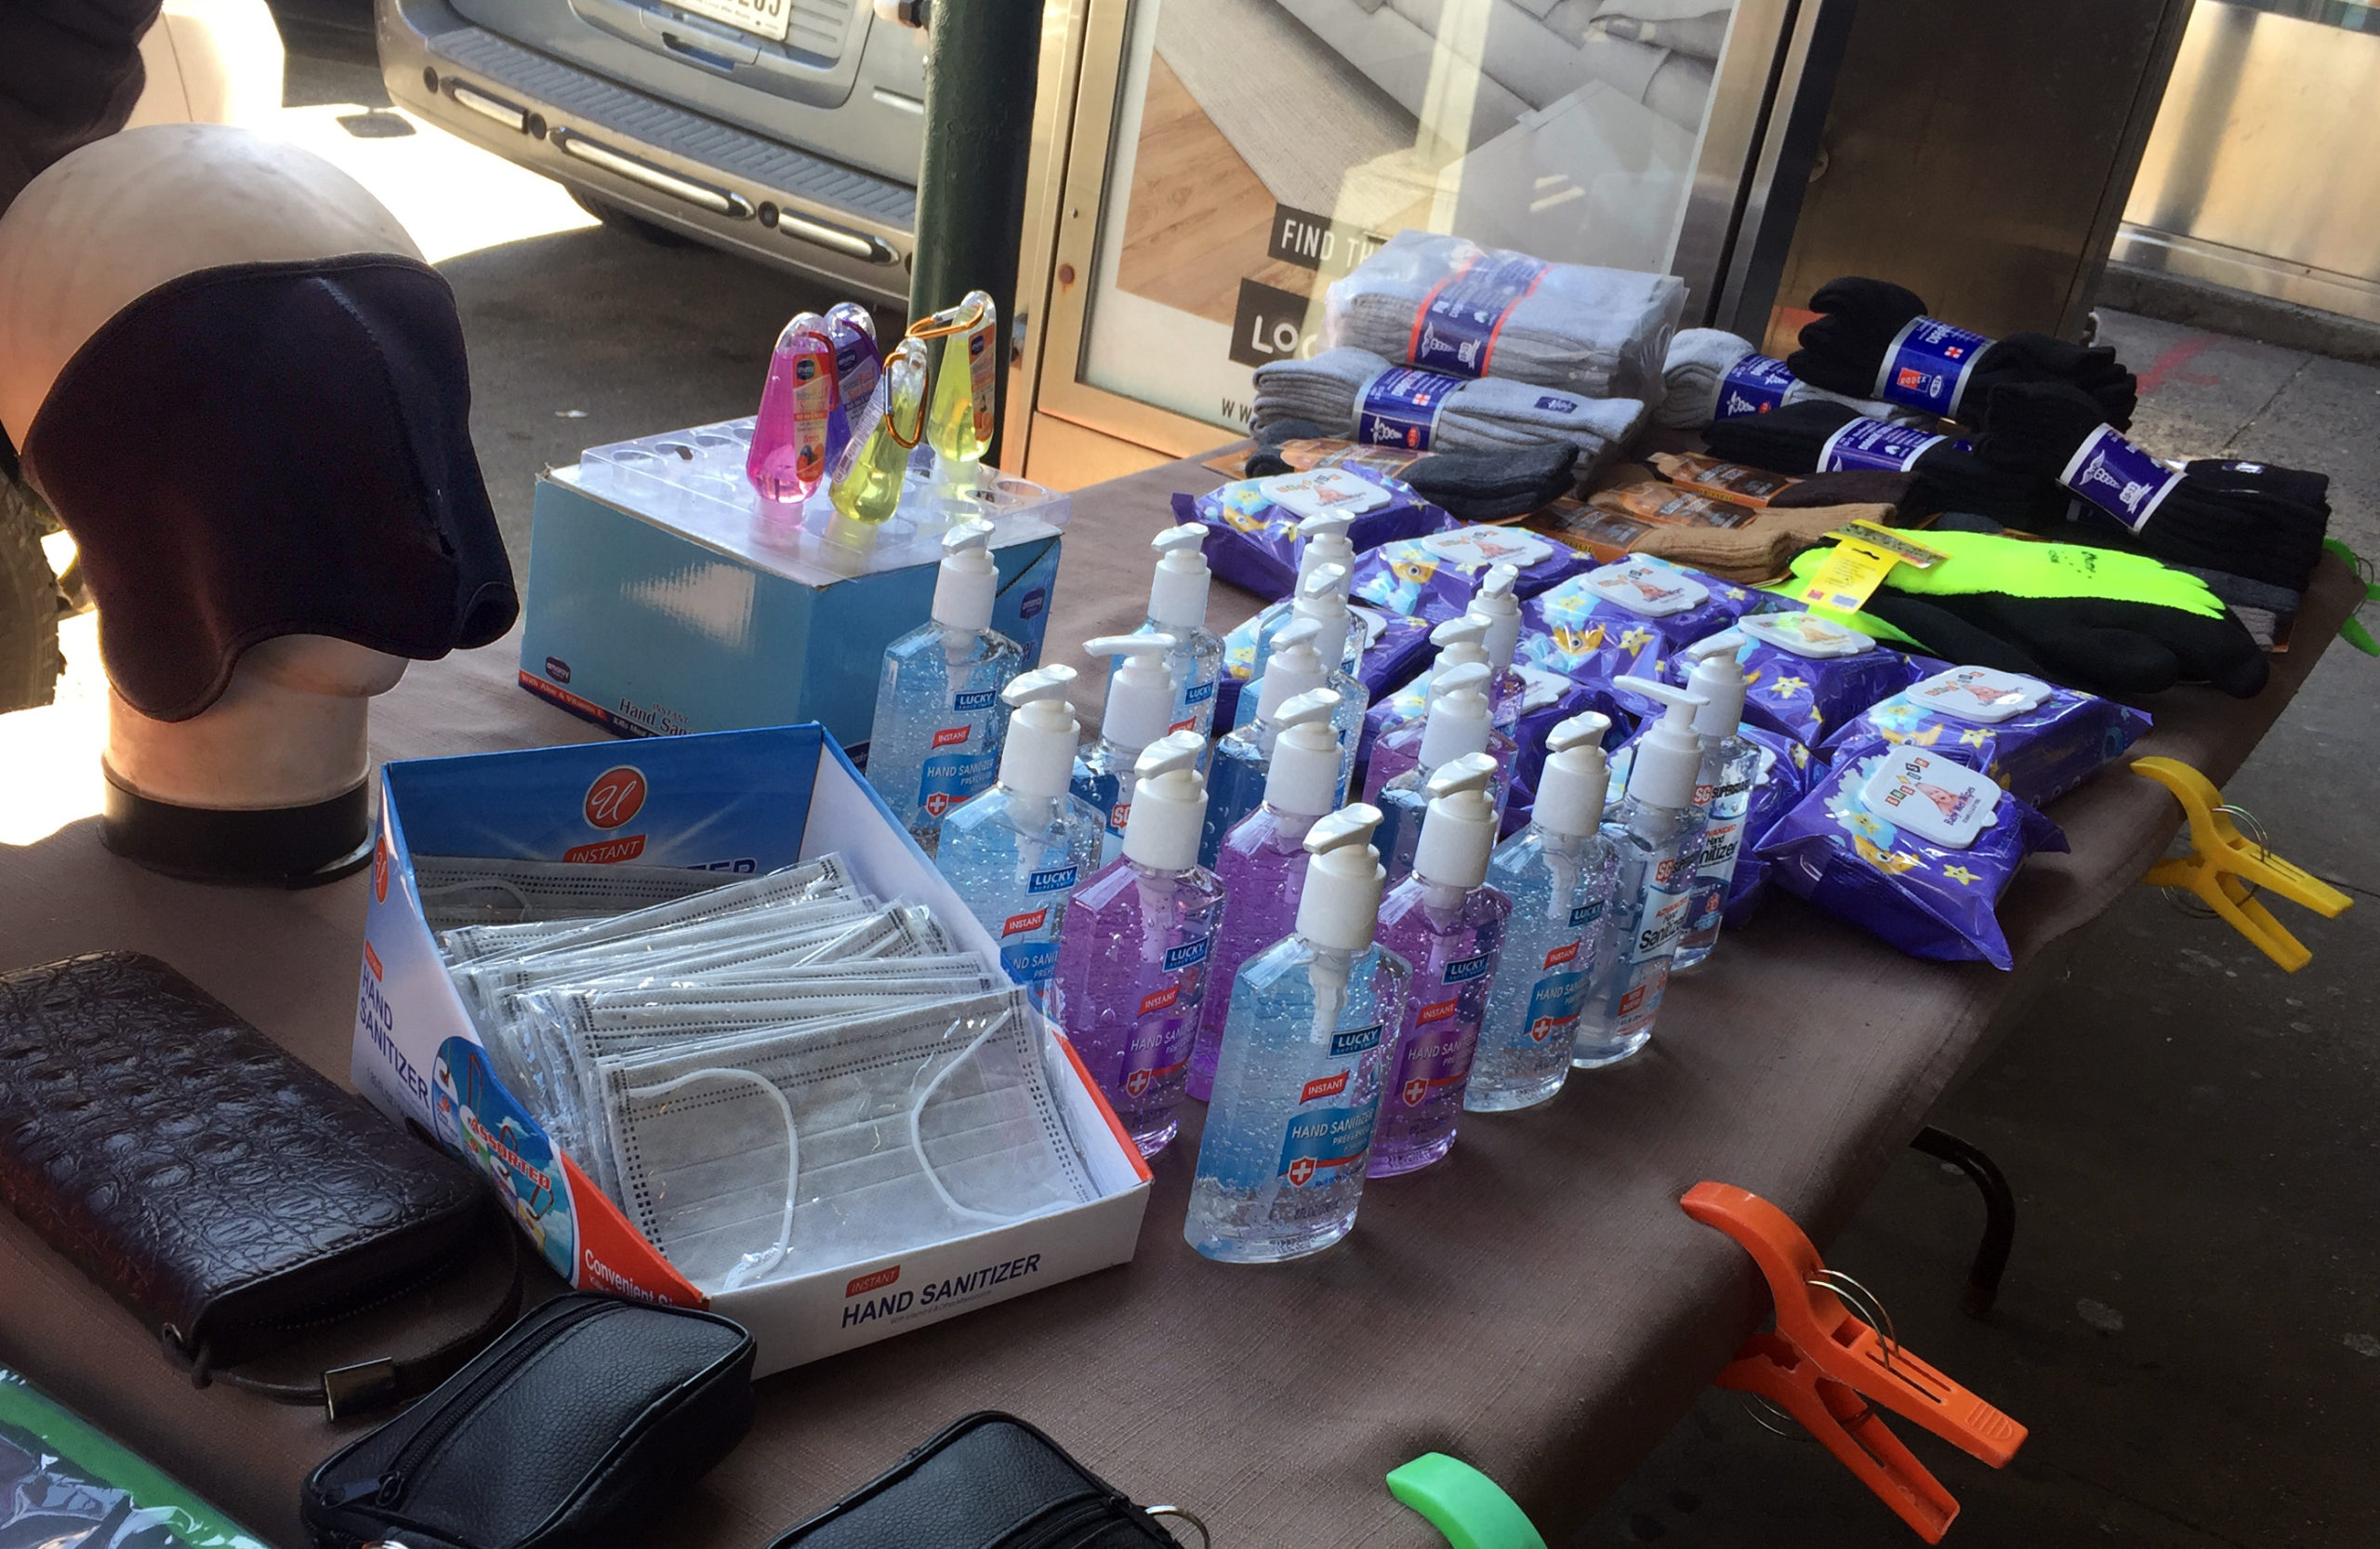 A street vendor was doing a brisk business on Monday selling hand sanitizer and surgical masks. Photo: Alex Williamson/Brooklyn Eagle